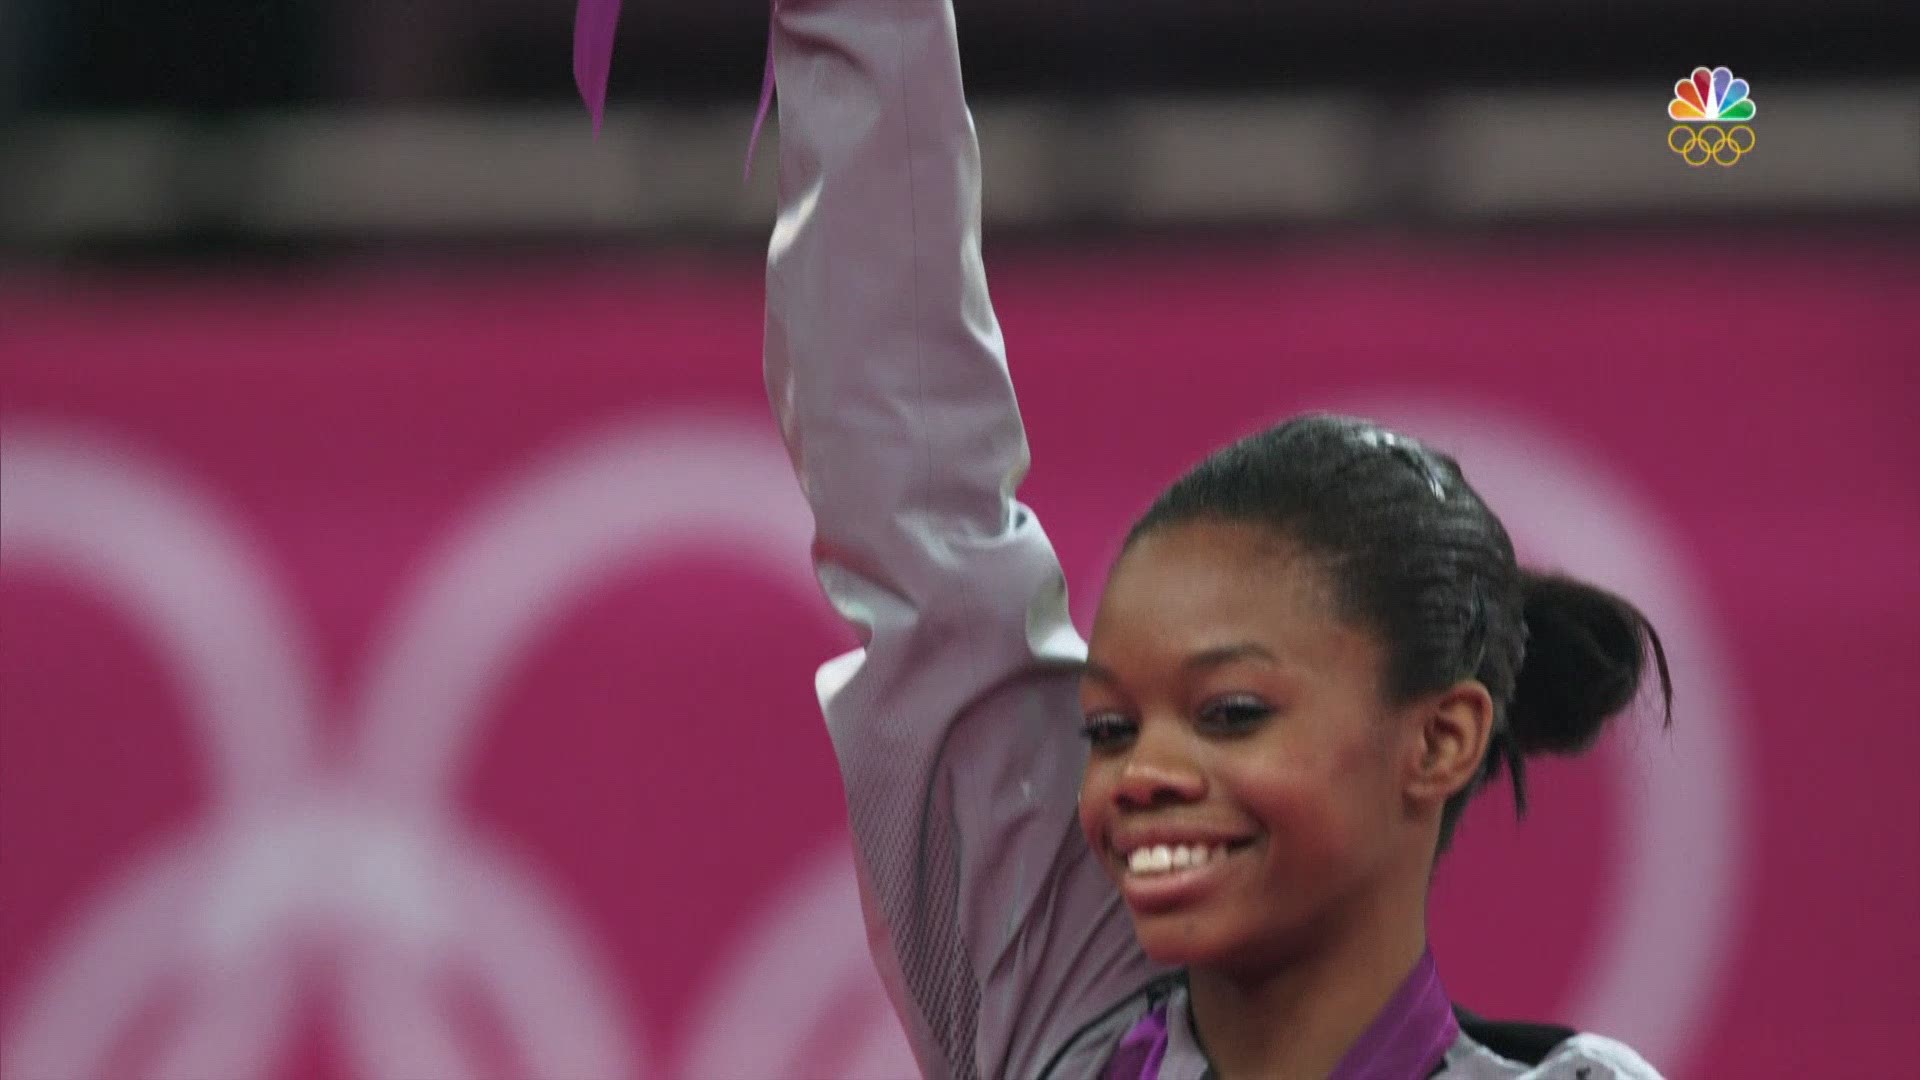 At just 16-years-old, Gabby Douglas won the gold medal in the individual all around gymnastics competition at the London Olympics.